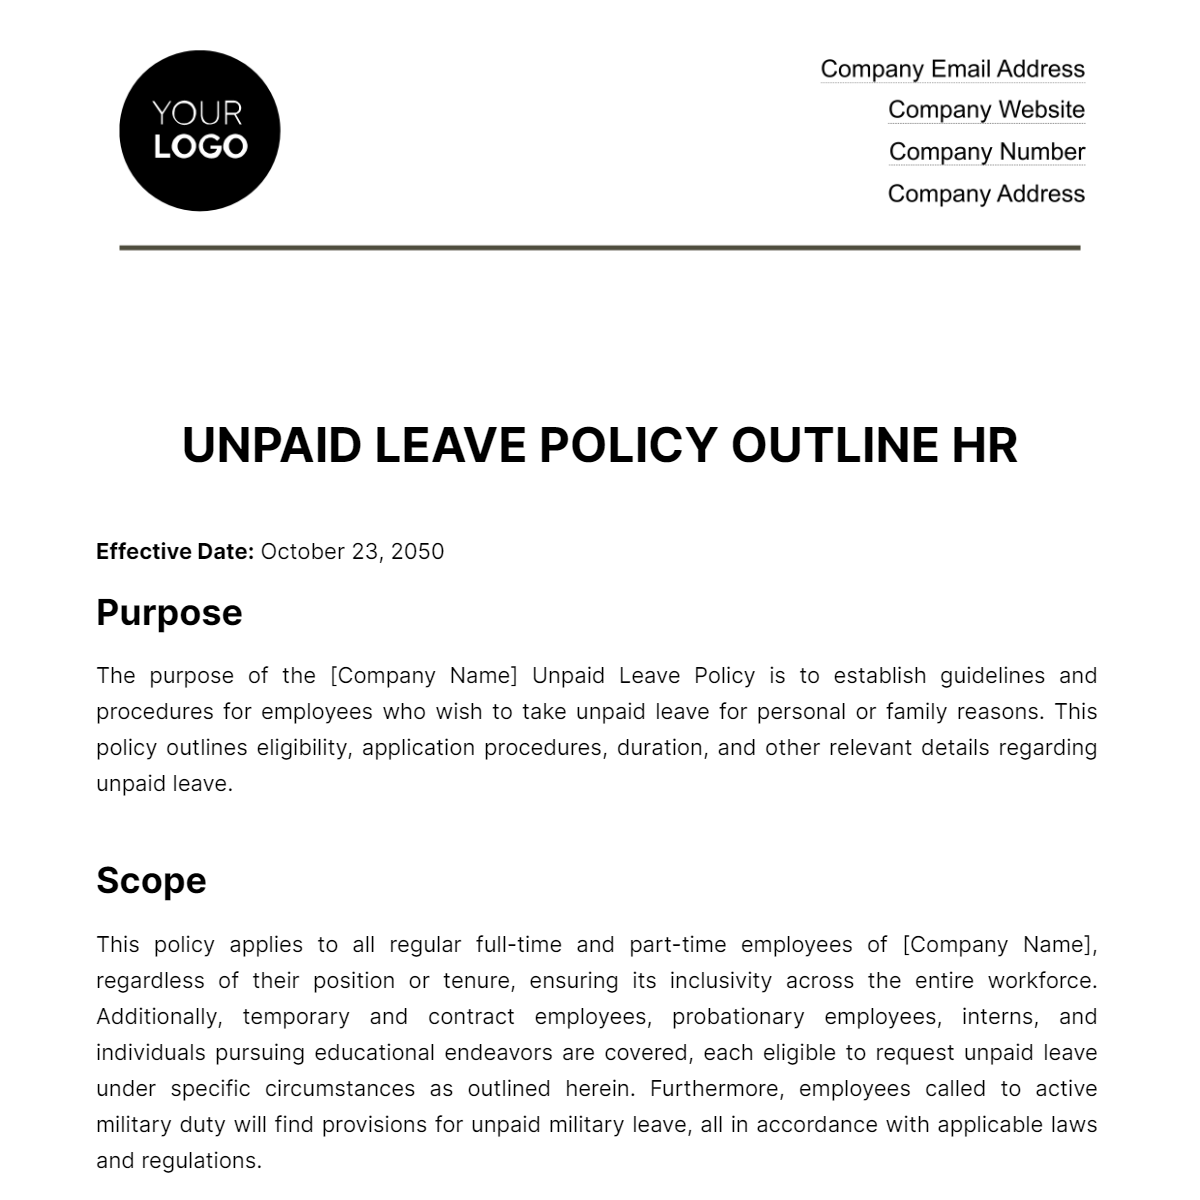 Free Unpaid Leave Policy Outline HR Template